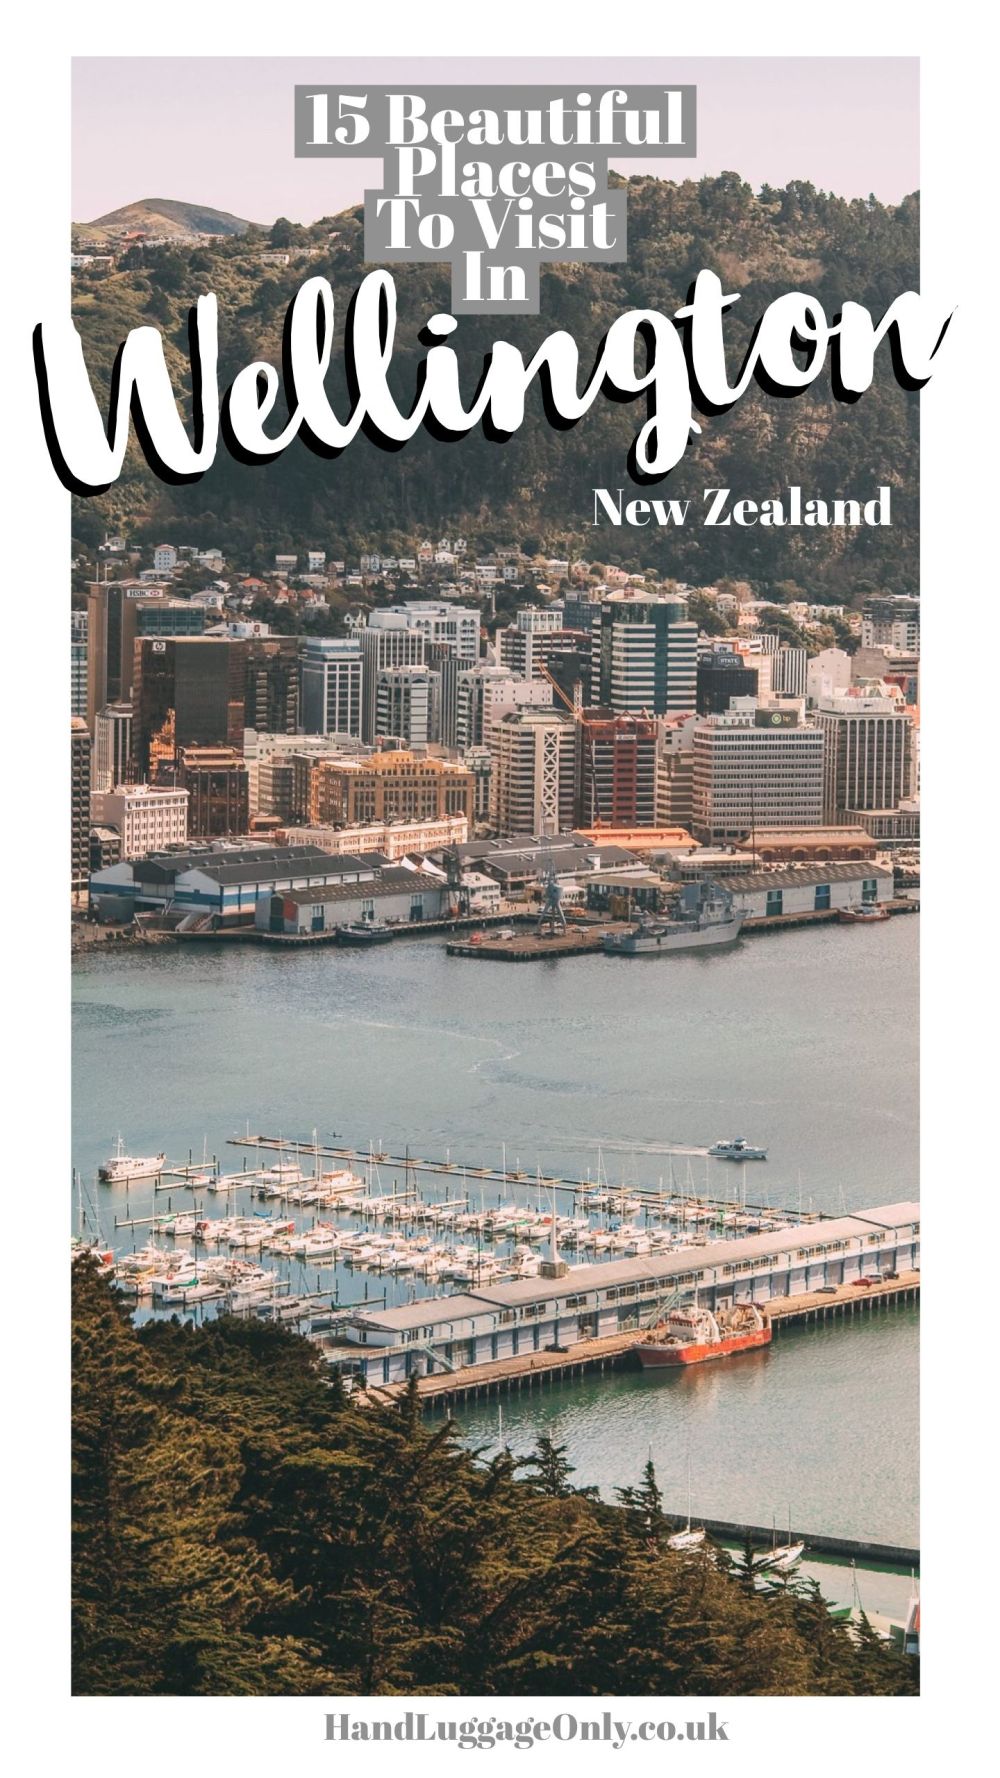 15 Things To Do In Wellington, New Zealand (1)